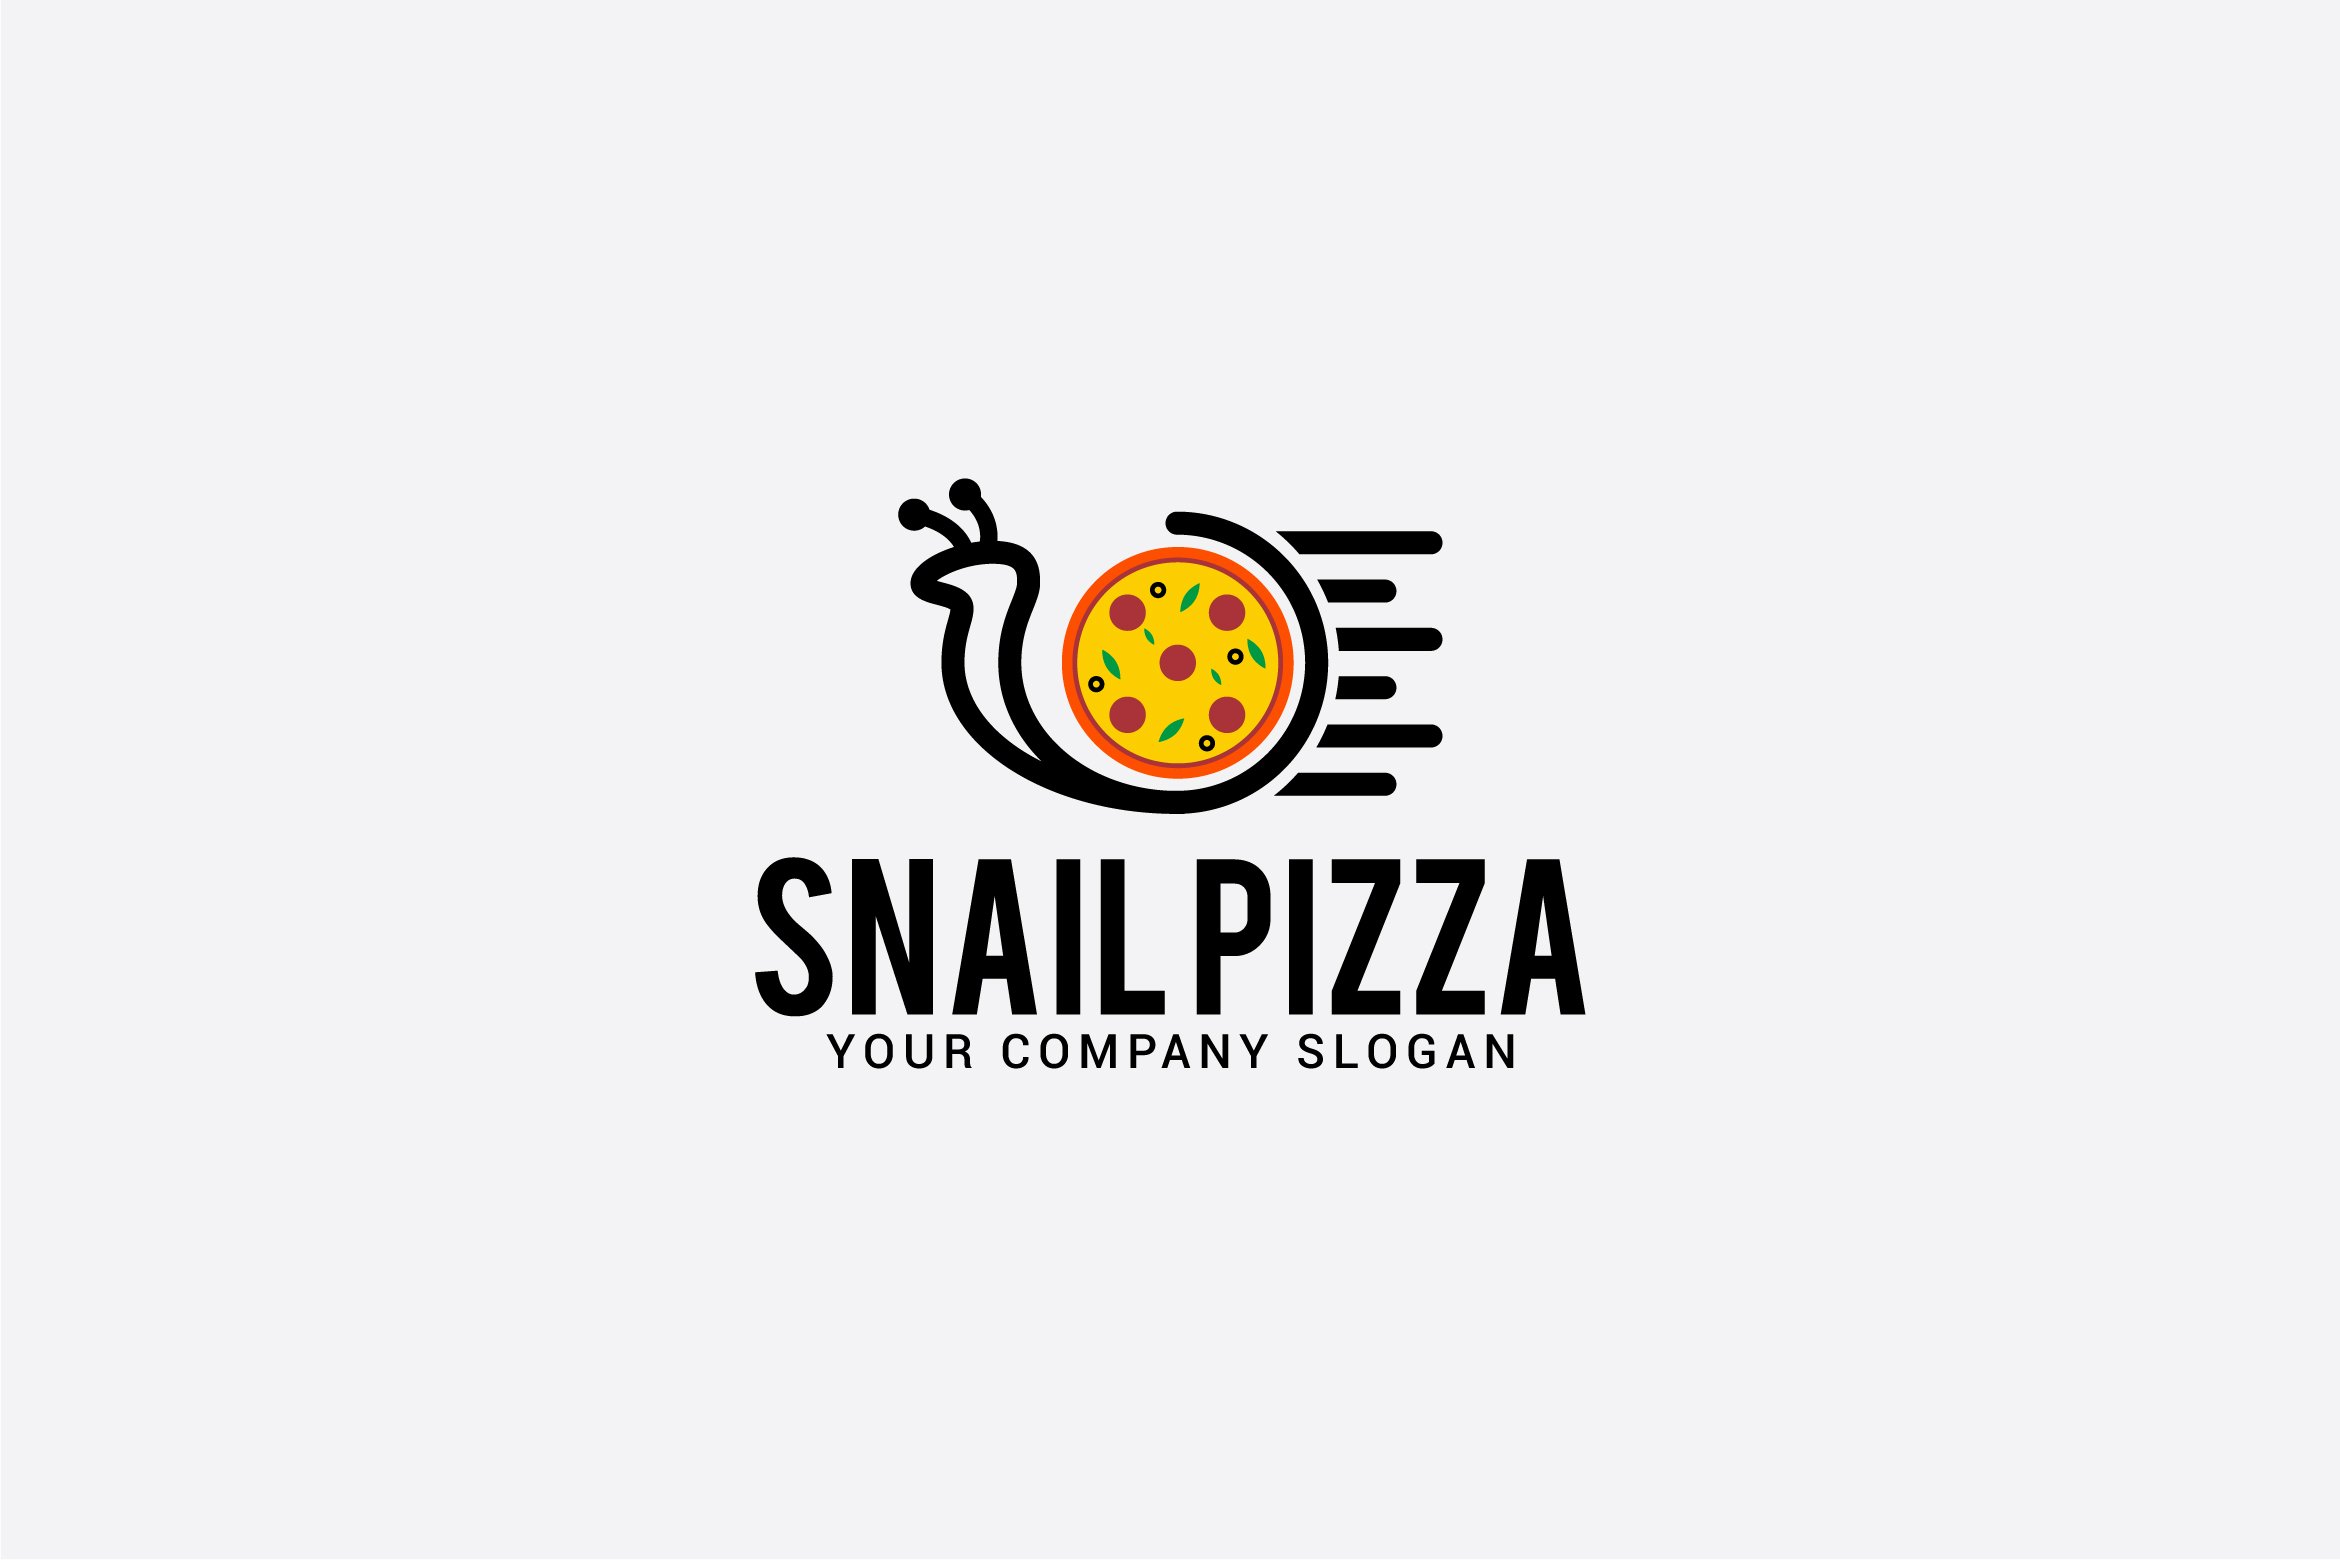 SNAIL PIZZA LOGO cover image.